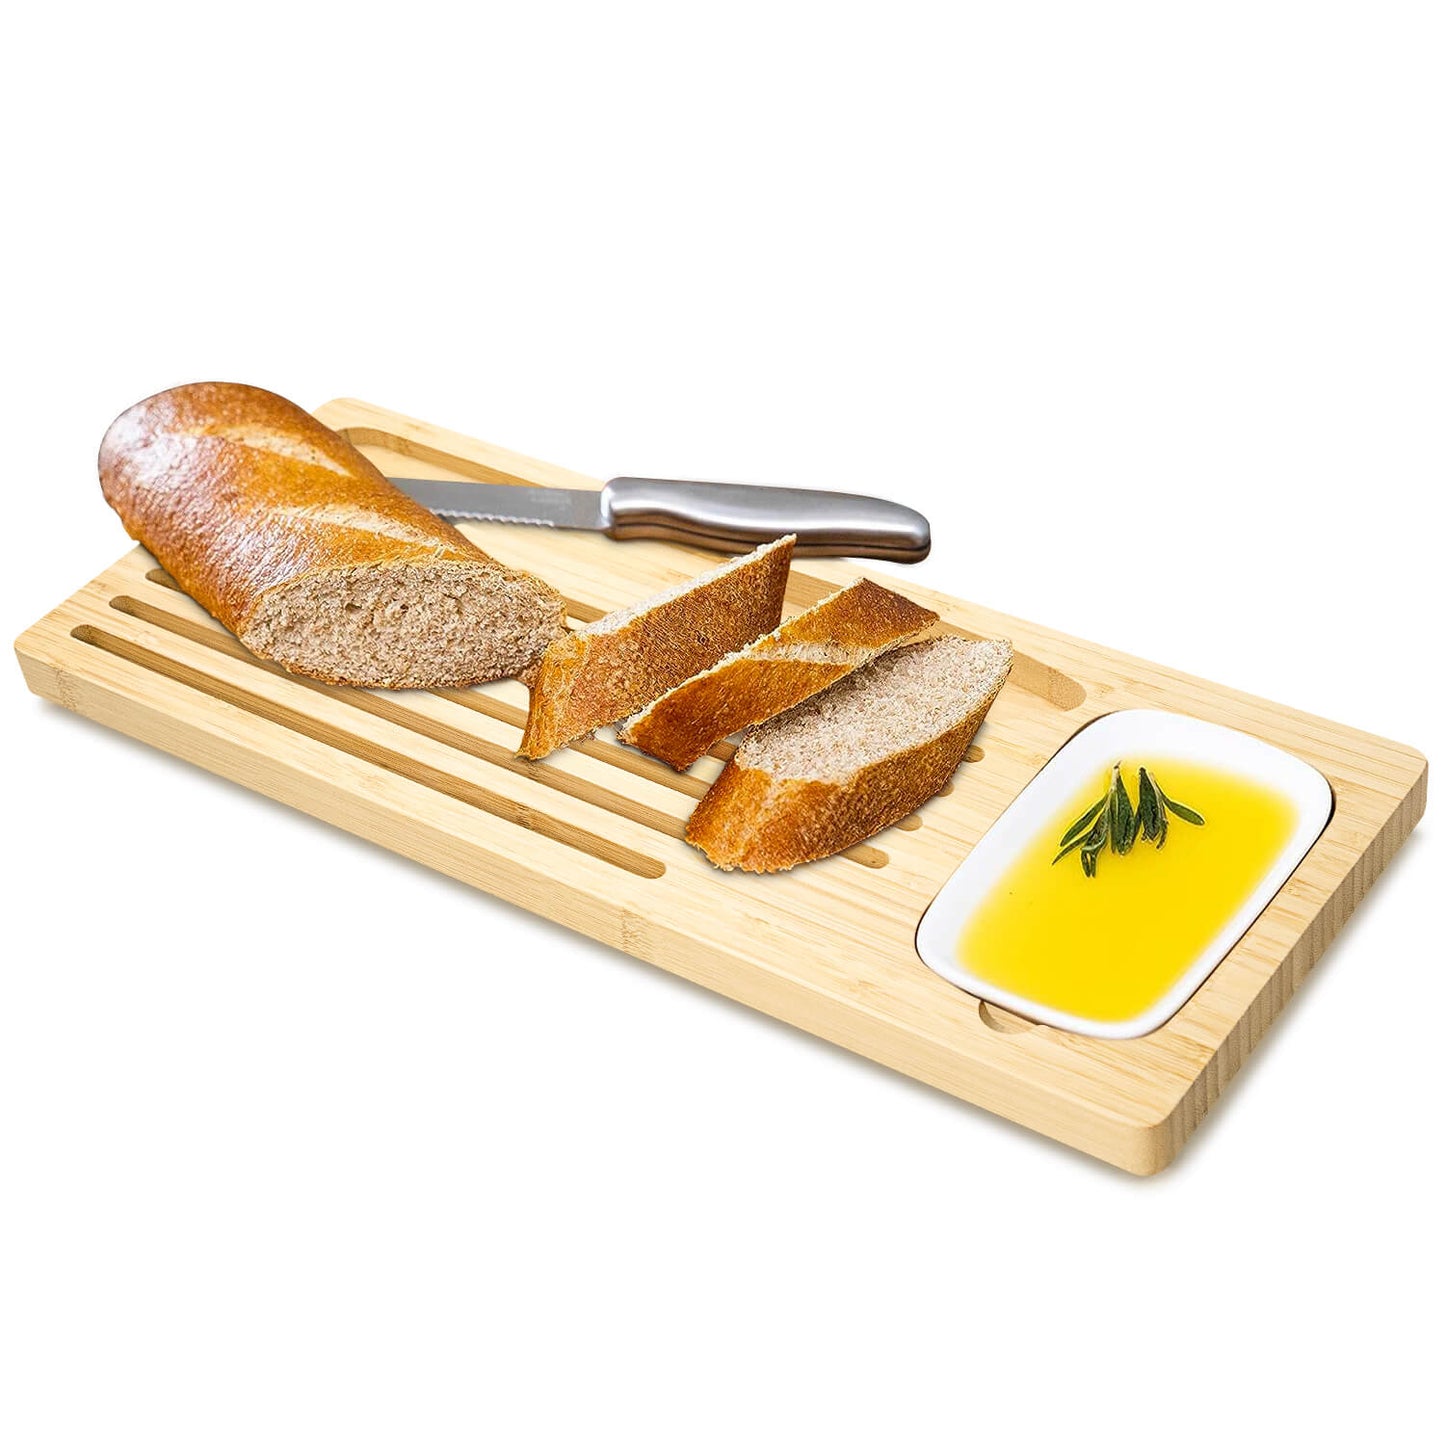 GL-Bamboo Bread Cutting Board with Crumb Catcher, Knife and Dipping Dish